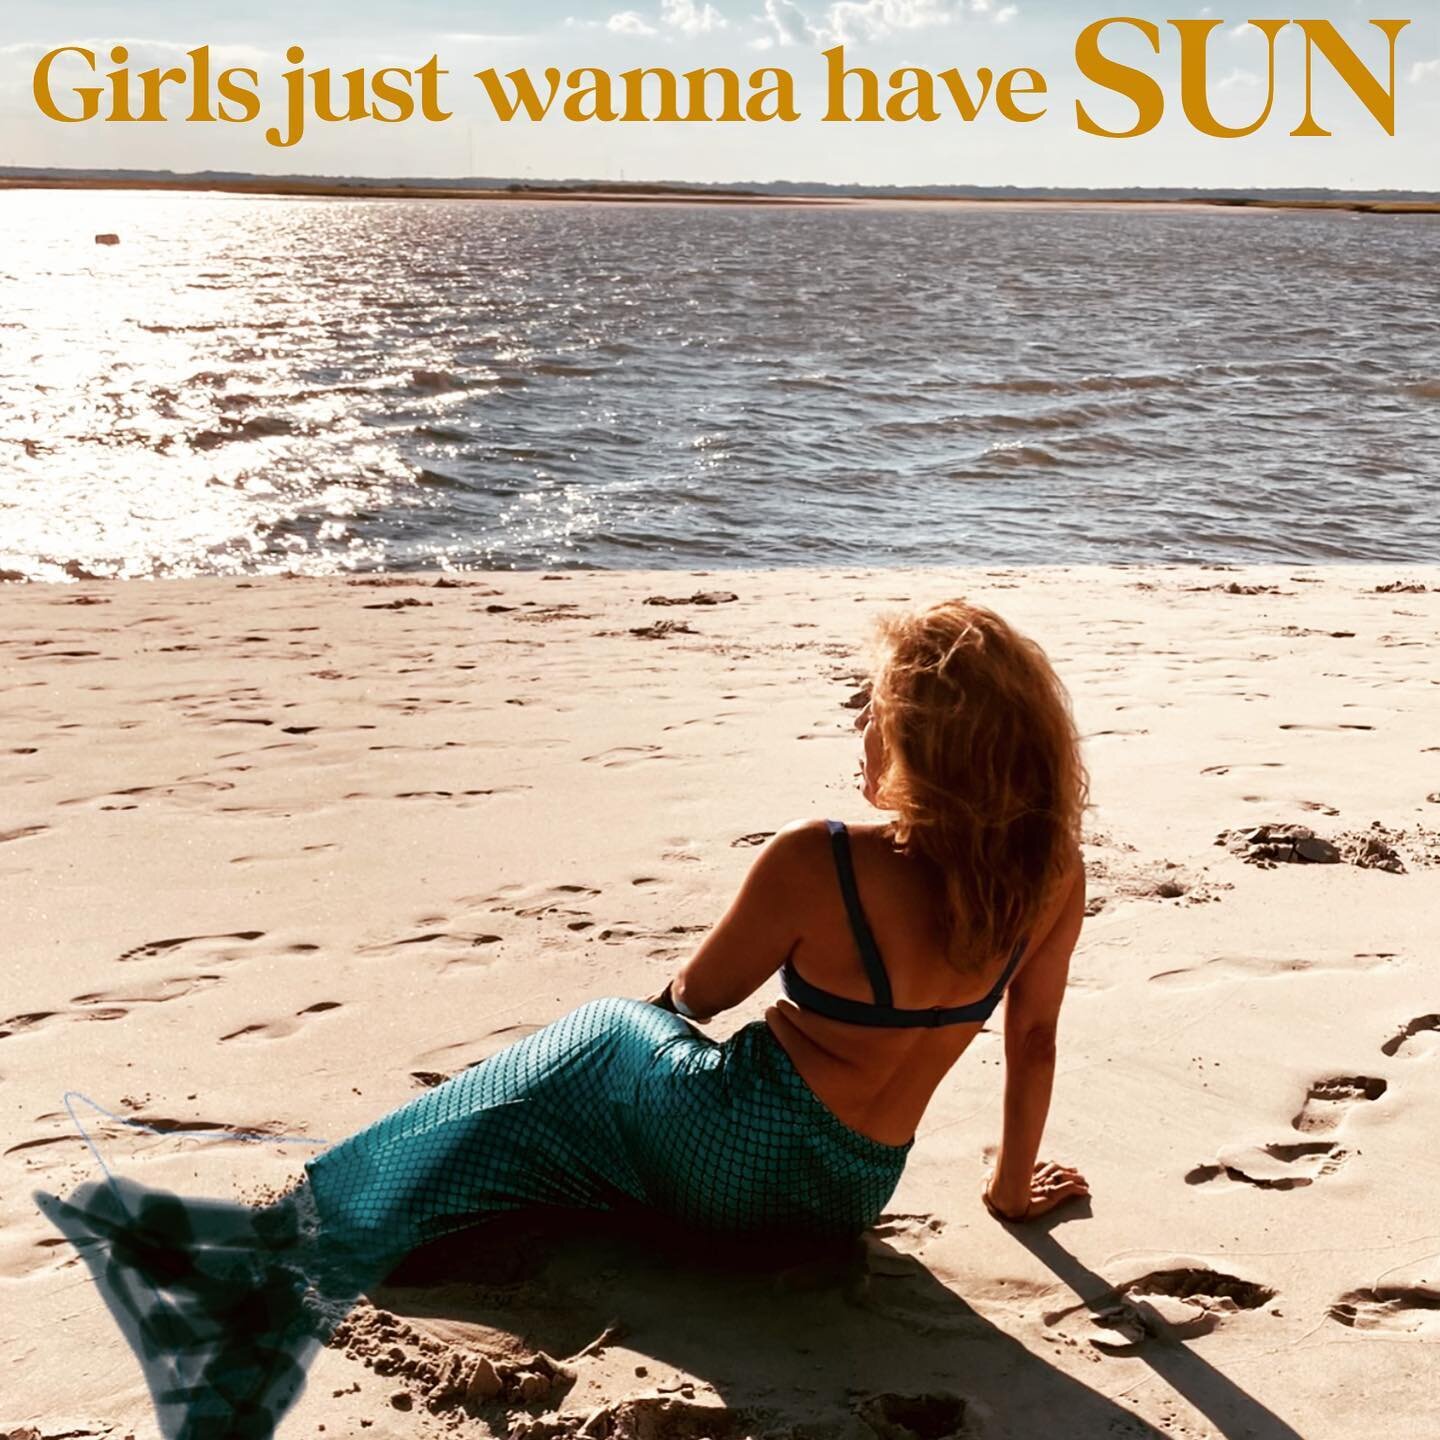 They just wanna. They just wanna. 🎶 ☀️😁

Drop a ☀️if you&rsquo;re on #teamsun!

PS Interesting things happen at the sea 😆

PPS Stay tuned for my enjoy-the-sun-without-burning-tips! Follow me here and sign up for my e-mail list on my website holist